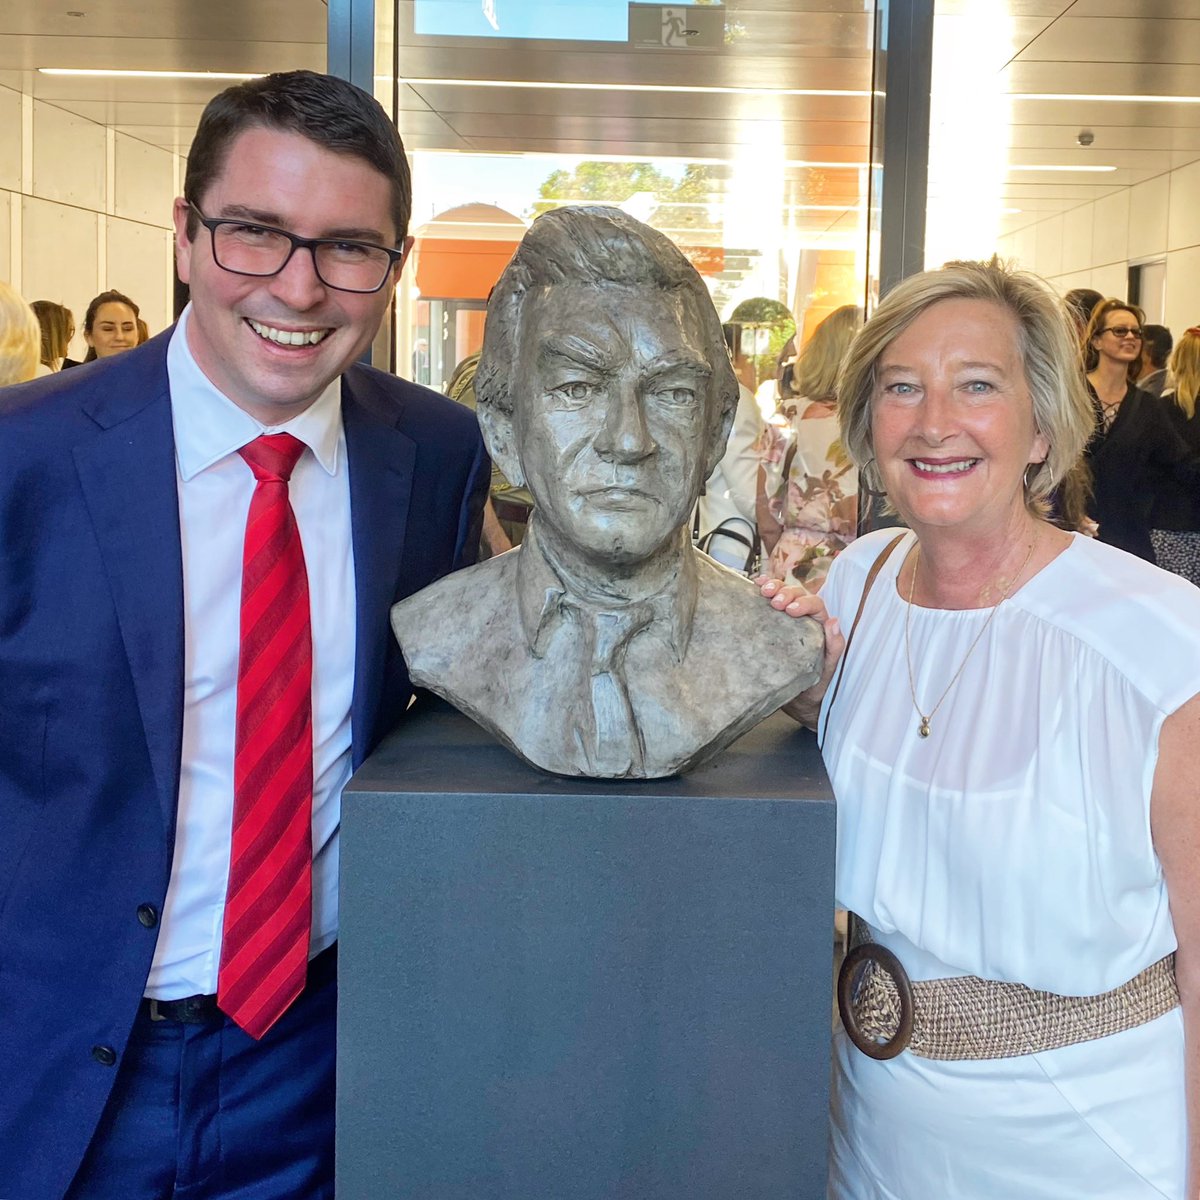 Patrick Gorman MP (Federal Member for Perth) with Jill Saunders and the bust of Bob Hawke by Jon Tarry.